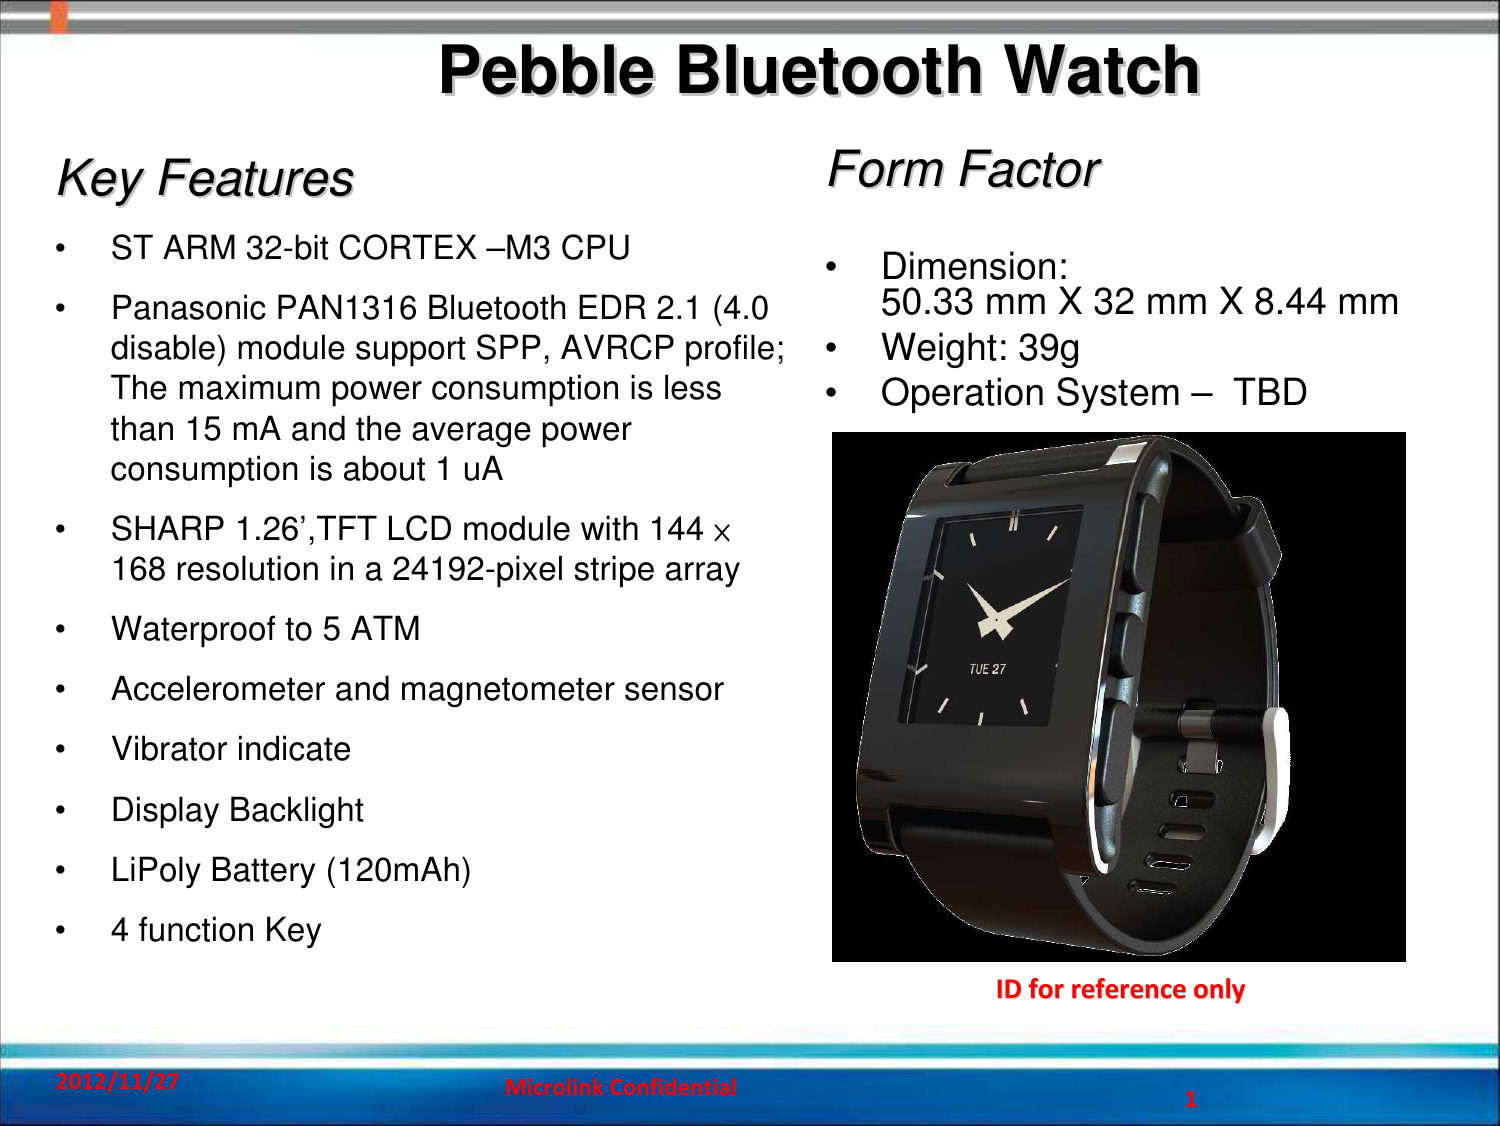 1Pebble Bluetooth WatchPebble Bluetooth WatchID for reference only  ID for reference only  2012/11/27 Microlink Confidential 1Key FeaturesKey Features• ST ARM 32-bit CORTEX –M3 CPU• Panasonic PAN1316 Bluetooth EDR 2.1 (4.0 disable) module support SPP, AVRCP profile; The maximum power consumption is less than 15 mA and the average powerconsumption is about 1 uA• SHARP 1.26’,TFT LCD module with 144 ×168 resolution in a 24192-pixel stripe array• Waterproof to 5 ATM• Accelerometer and magnetometer sensor• Vibrator indicate• Display Backlight • LiPoly Battery (120mAh)• 4 function Key Form FactorForm Factor• Dimension: 50.33 mm X 32 mm X 8.44 mm• Weight: 39g• Operation System – TBD